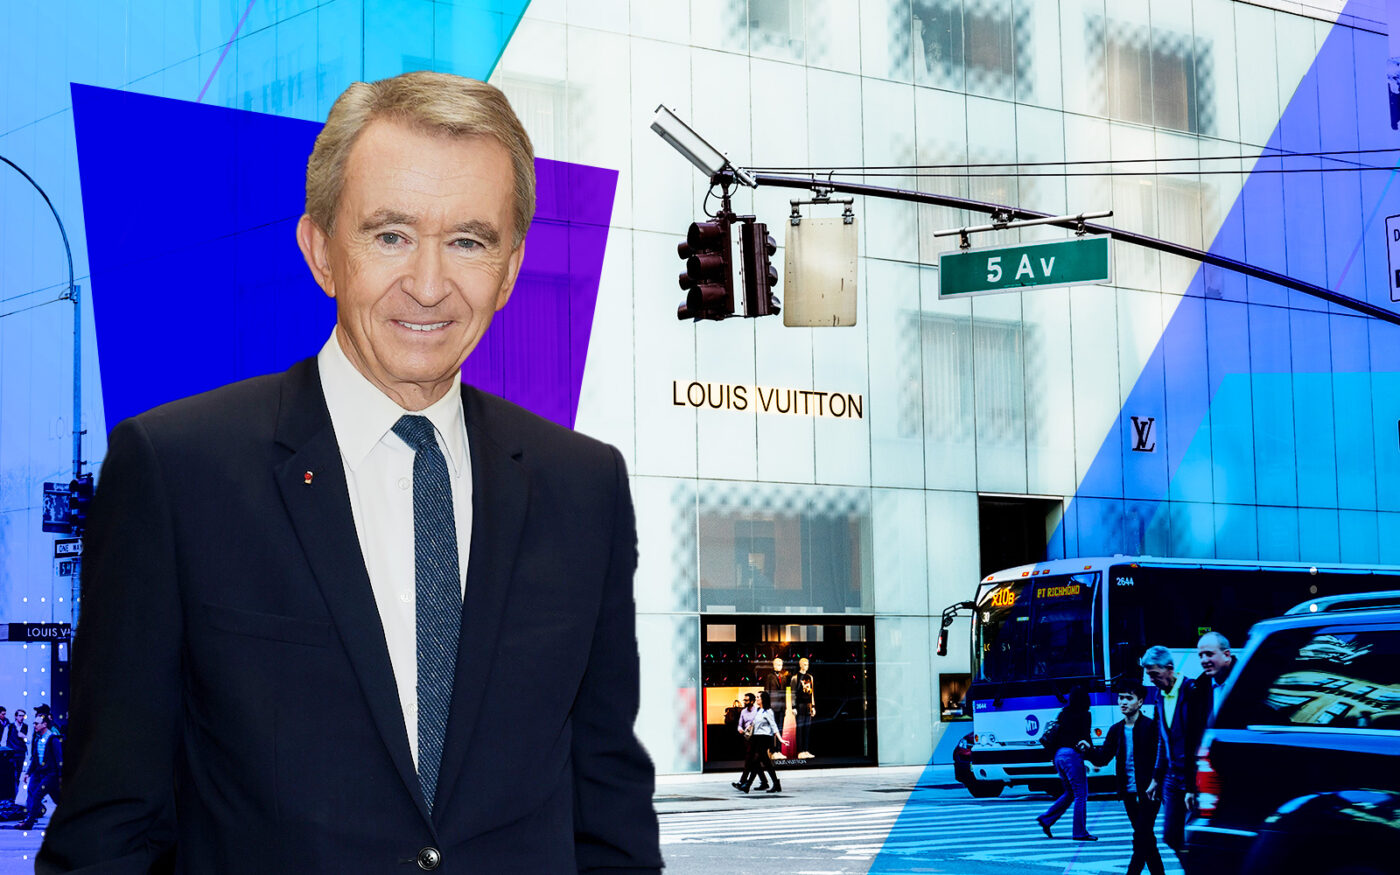 Louis Vuitton-owner LVMH on the future of retail: Mostly in-store